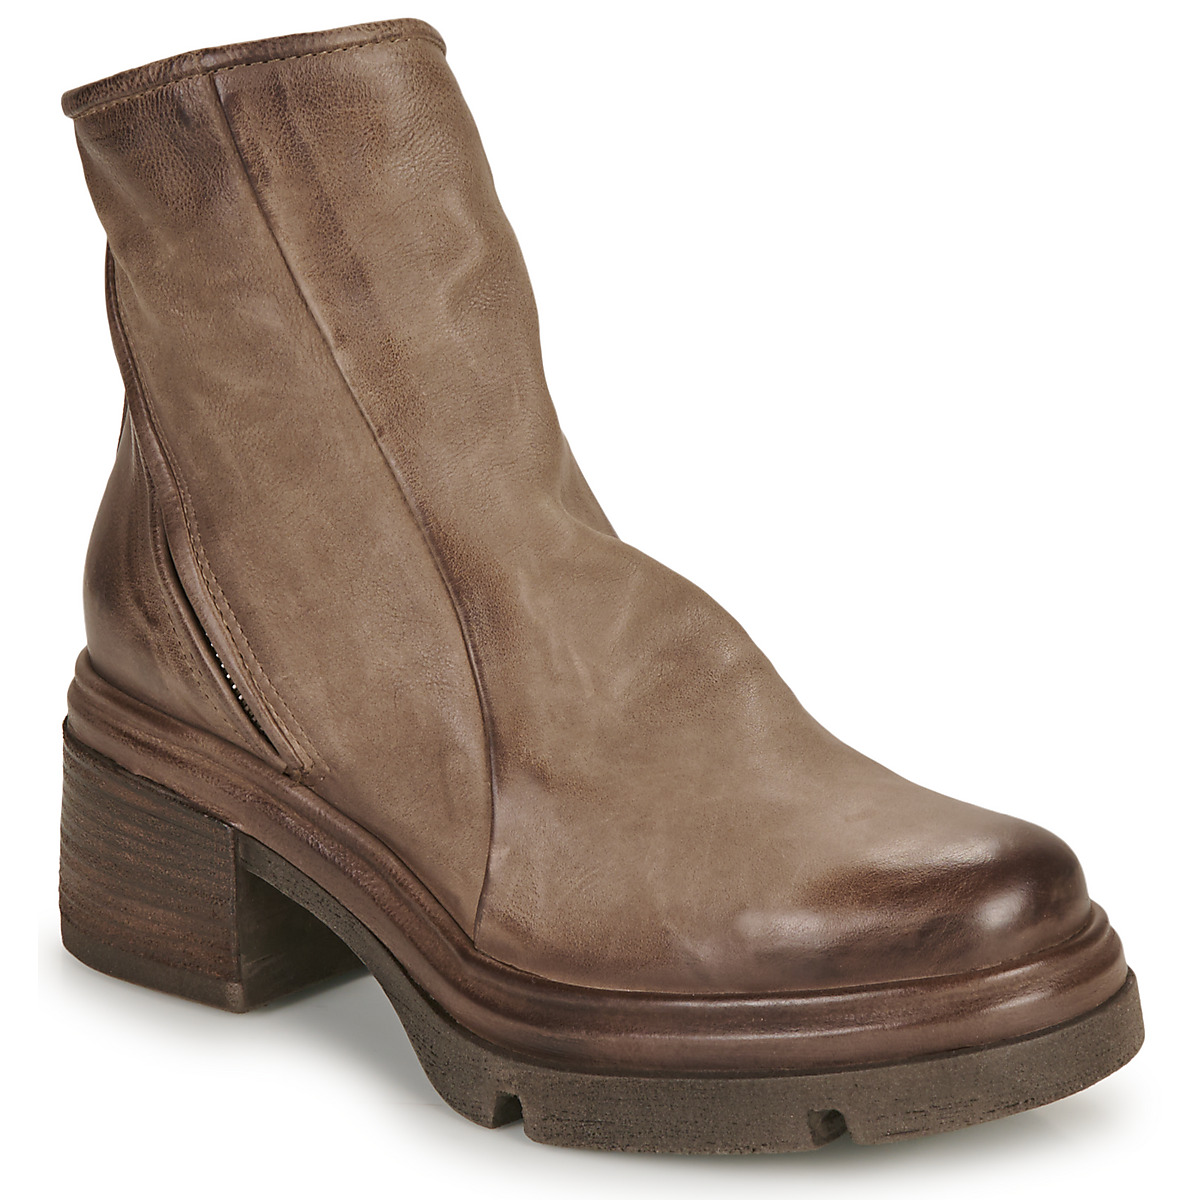 airstep / a.s.98  easy  low  women's mid boots in brown